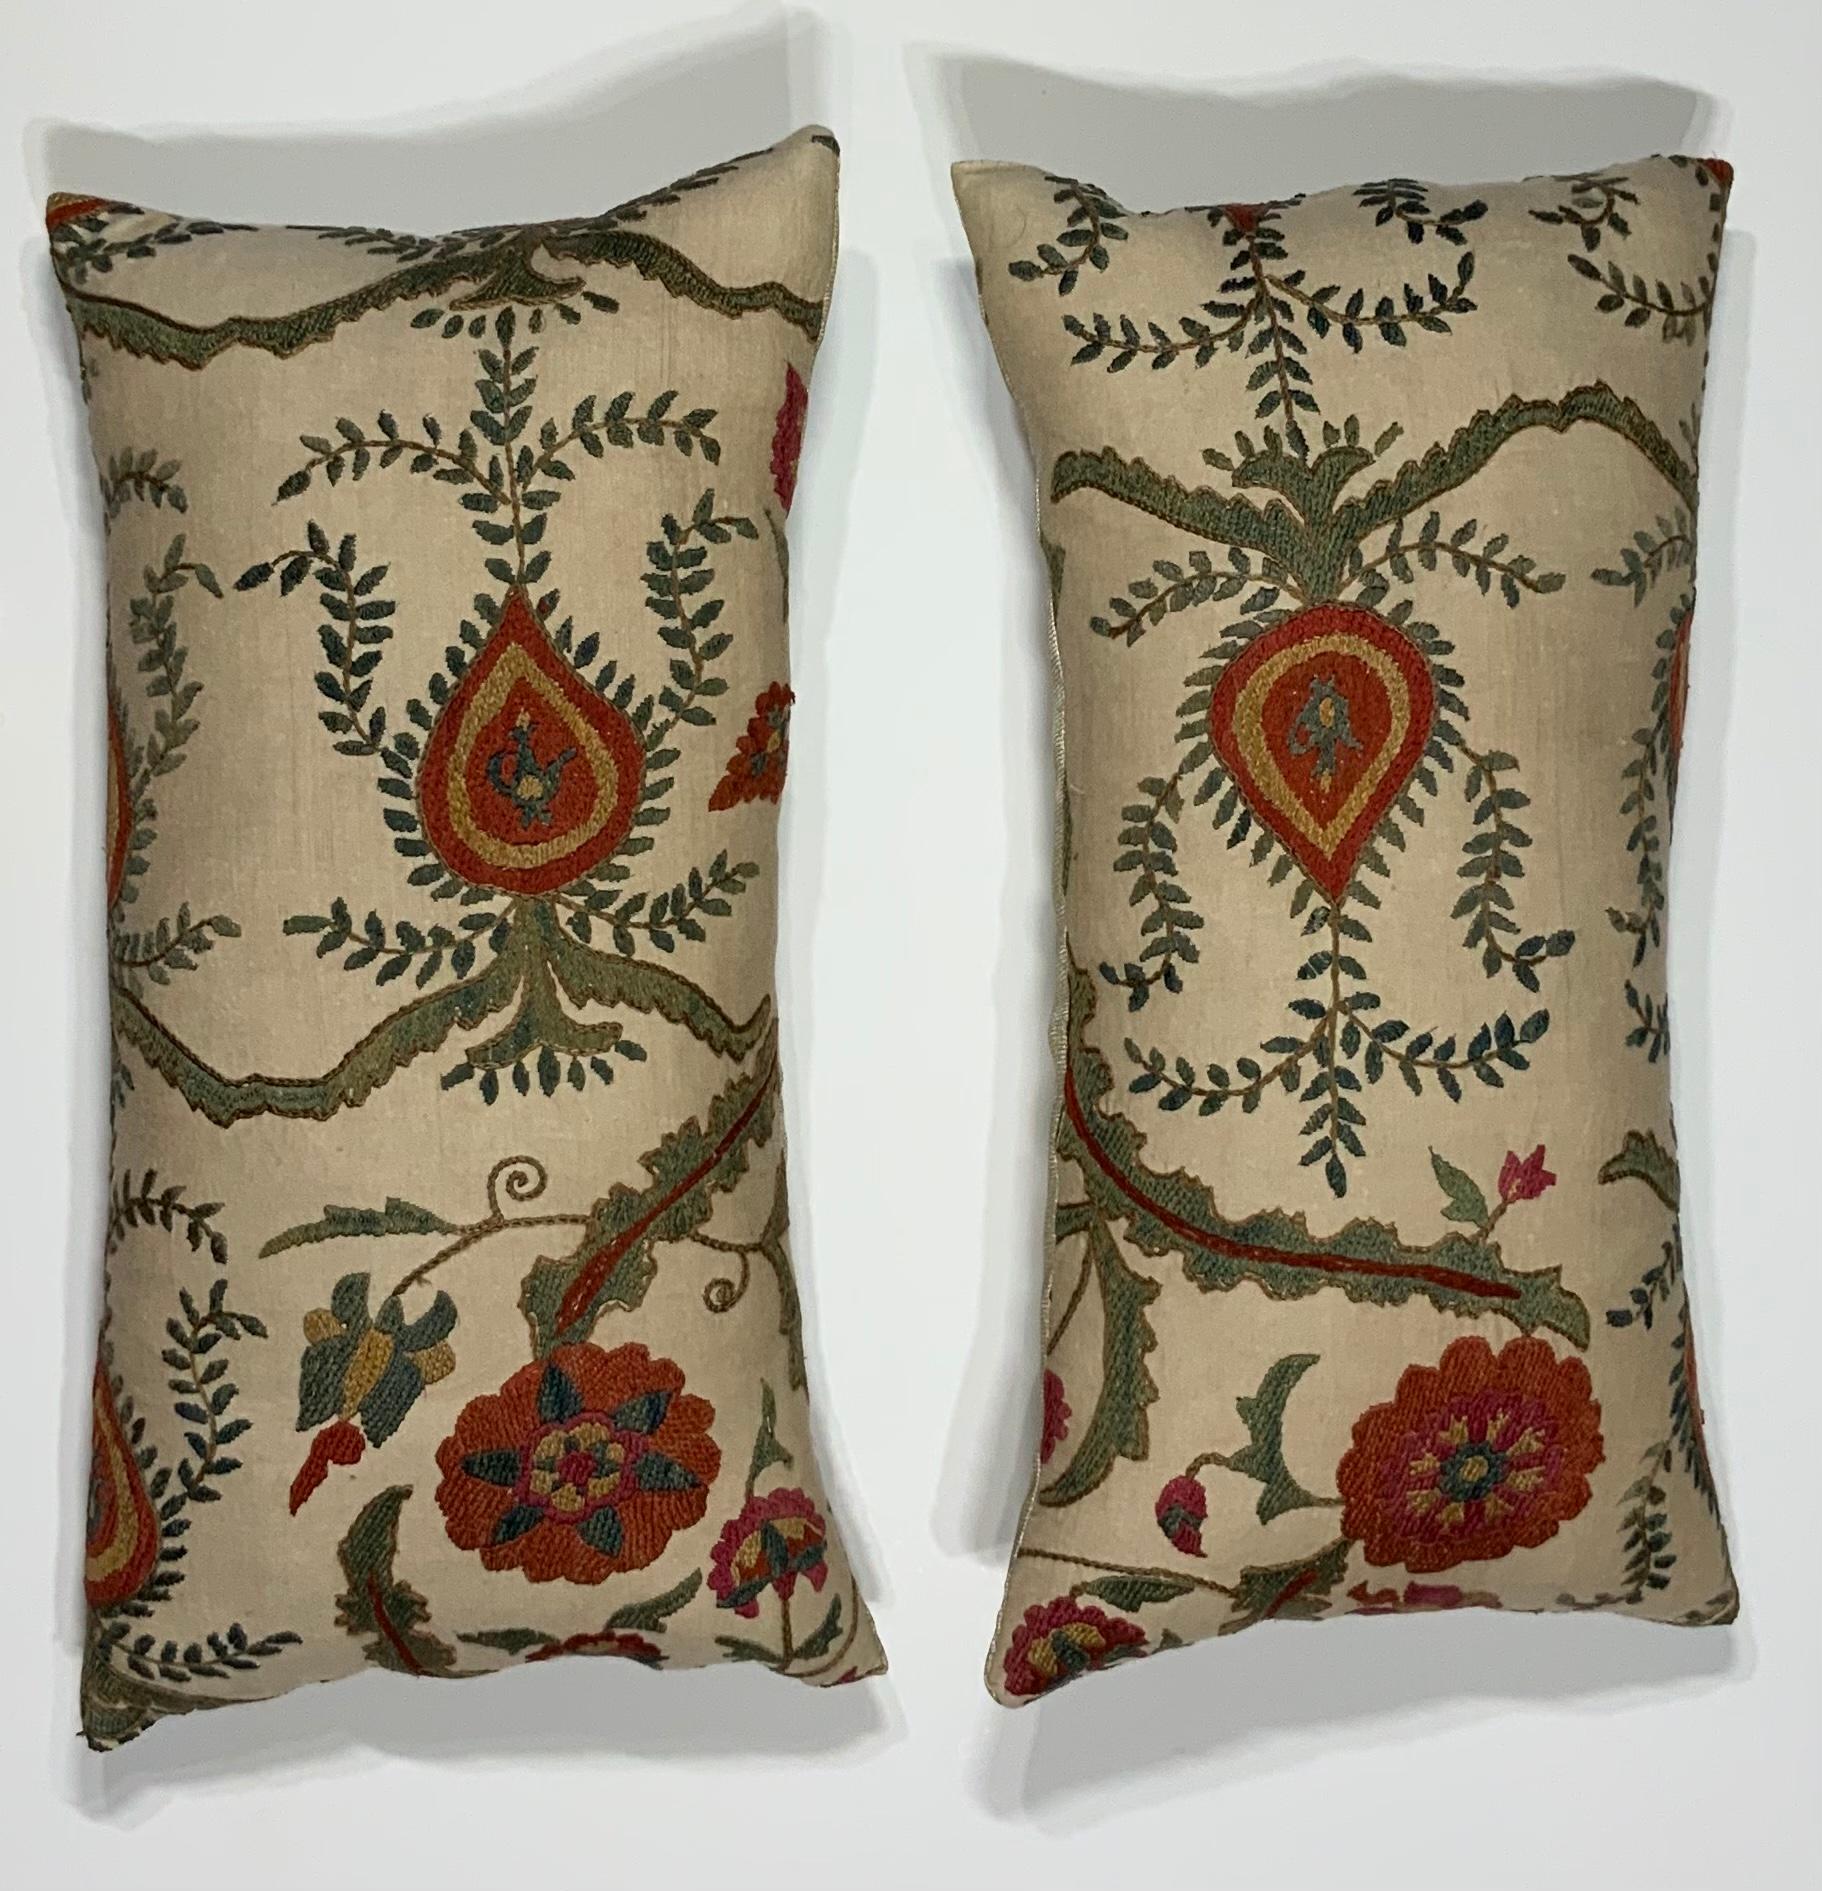 Beautiful pair of pillows made of hand embroidery silk, of colorful flowers and vines on a cream color cotton background.
Fine cotton backing, Frash insert.